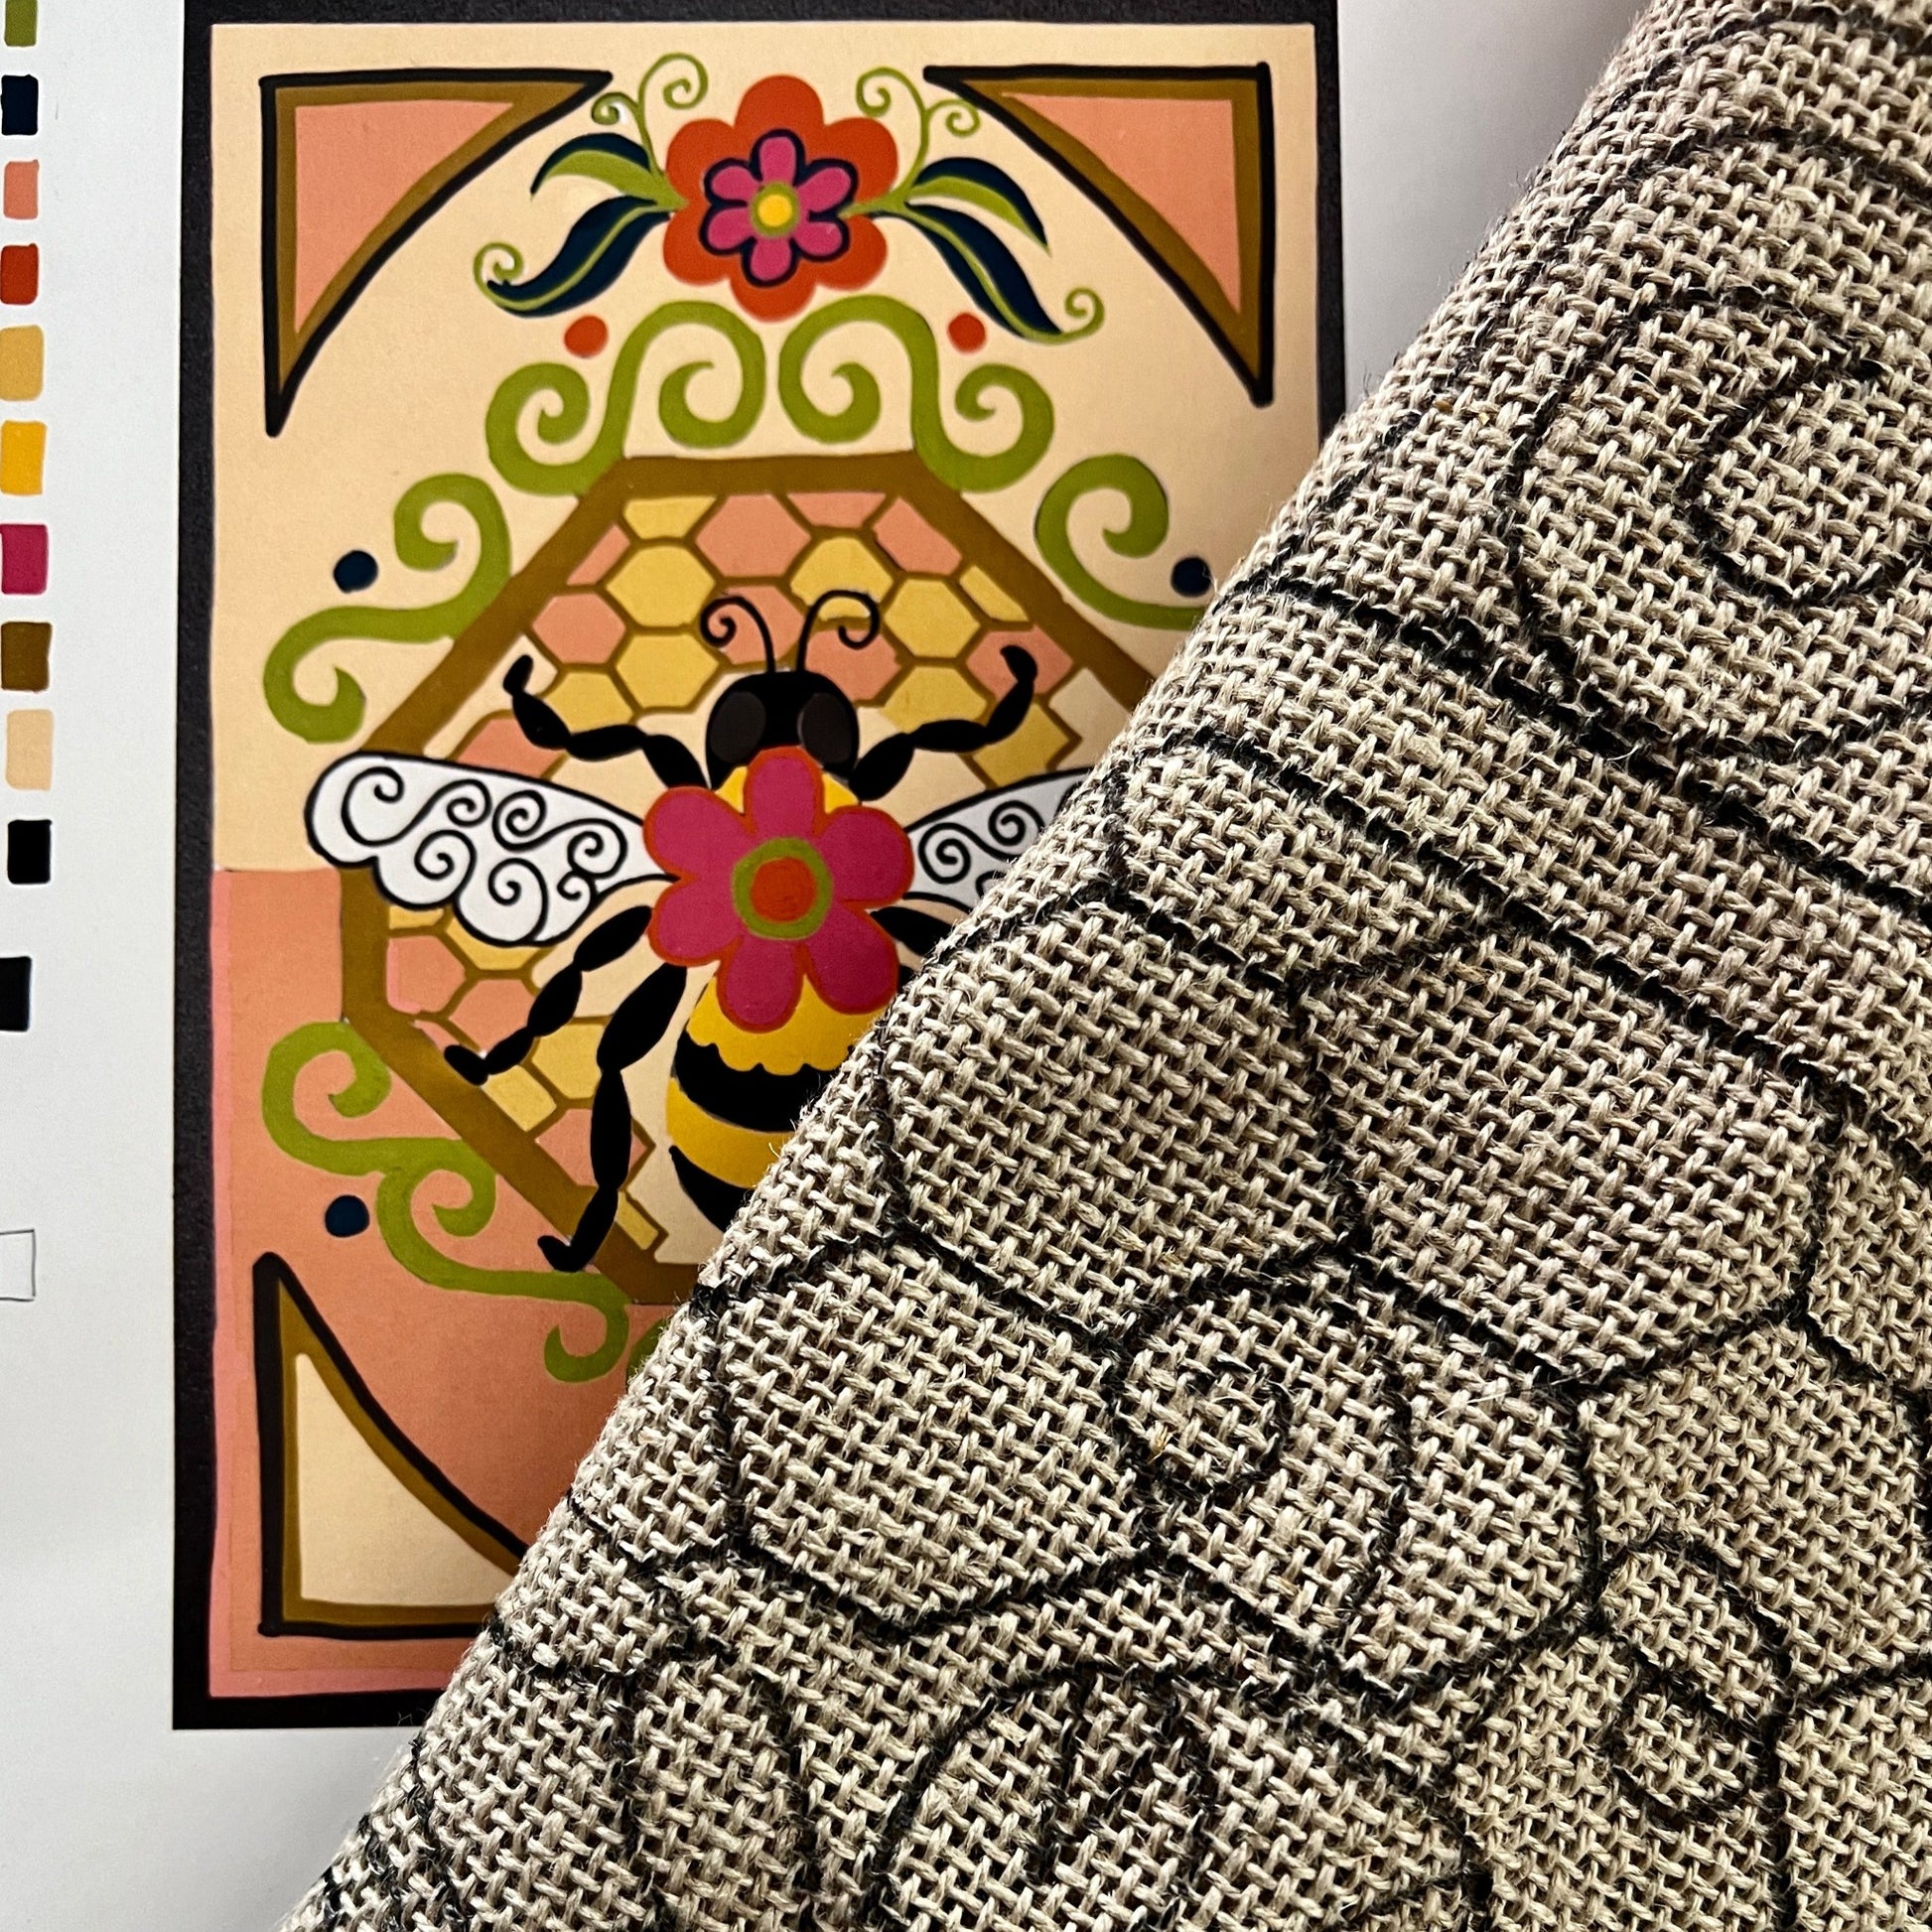 Bumblebee I- Rug Hooking Pattern on Linen, Color Guide,  by Orphaned Wool